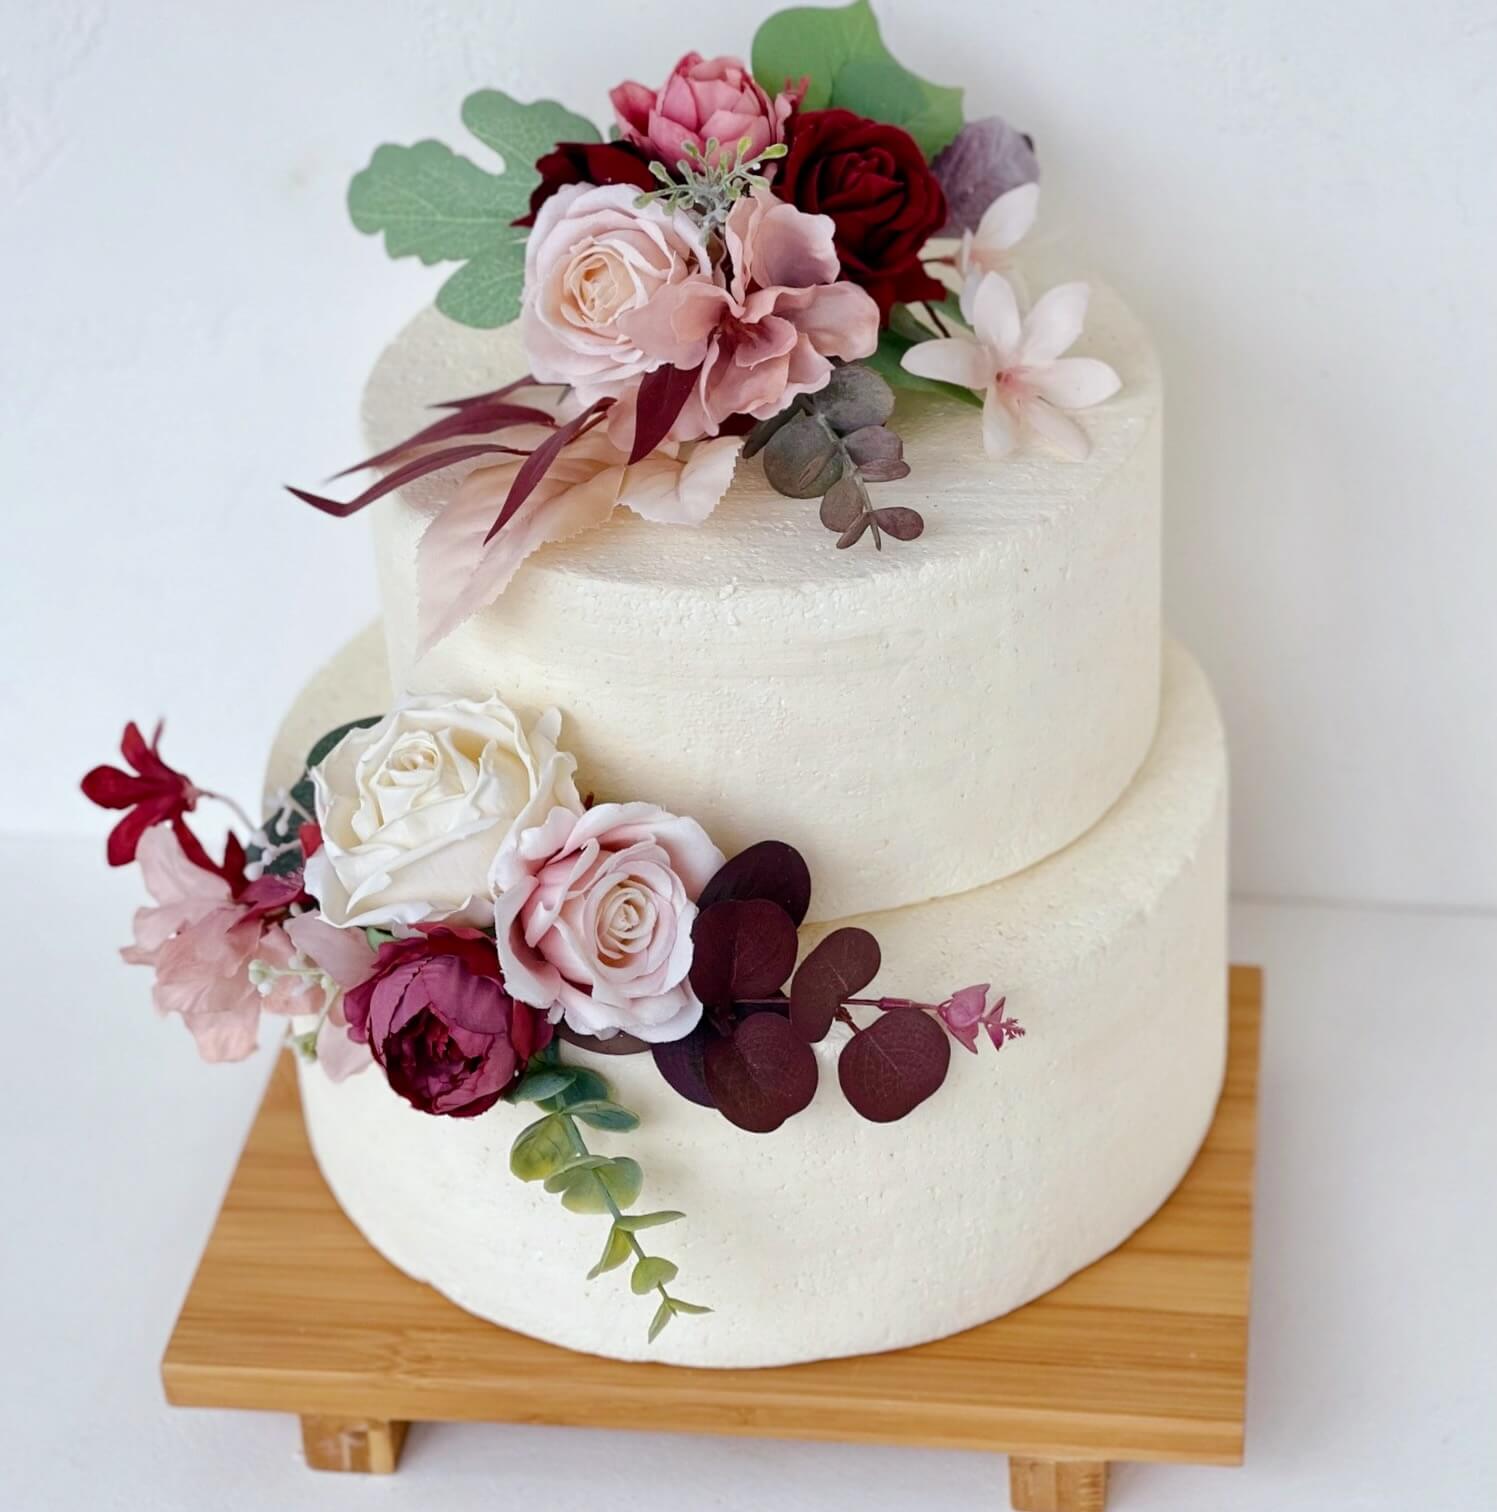 Can You Decorate A Cake With Artificial Flowers Artificial Plant Shop